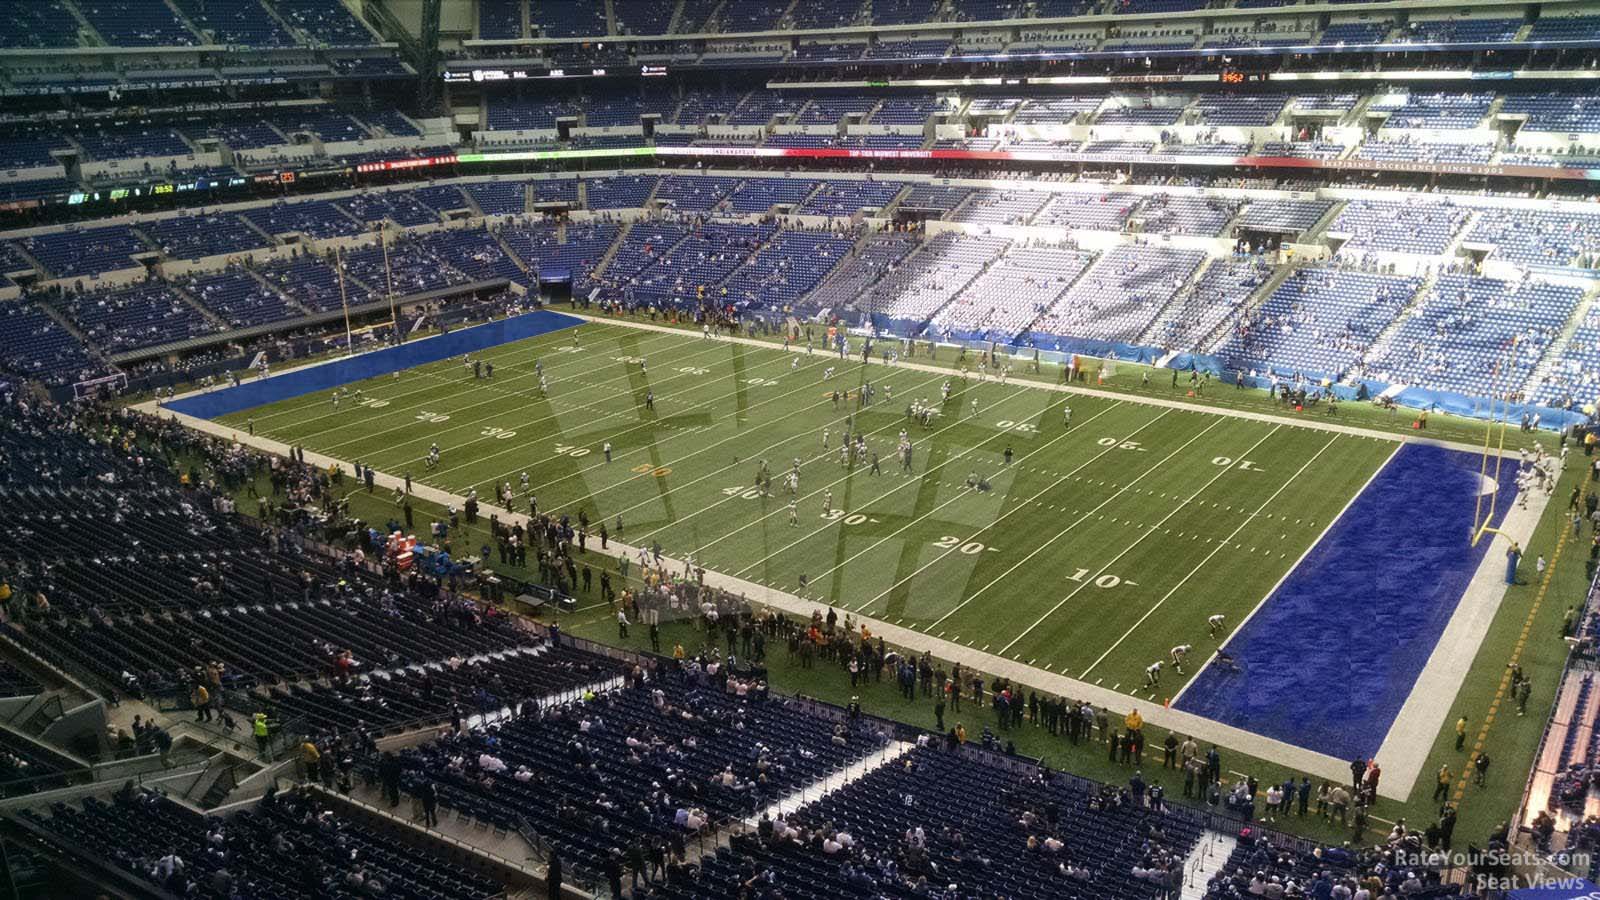 section 508, row 1 seat view  for football - lucas oil stadium